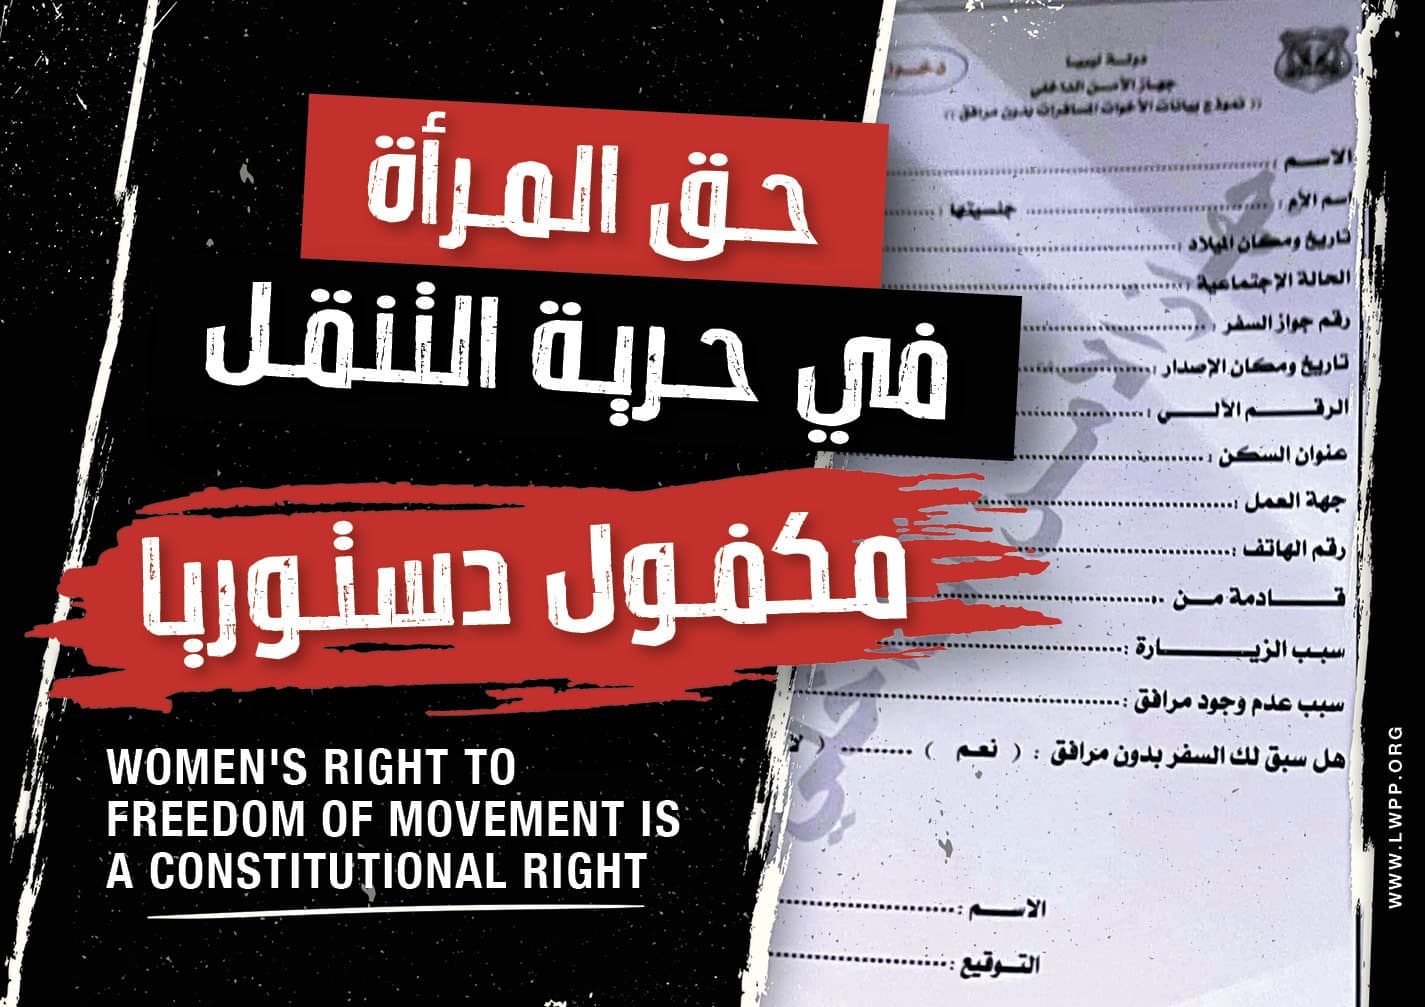 Statement: Violating women's right to freedom of movement is an insult to Libyan women and a contravention of the constitution and law